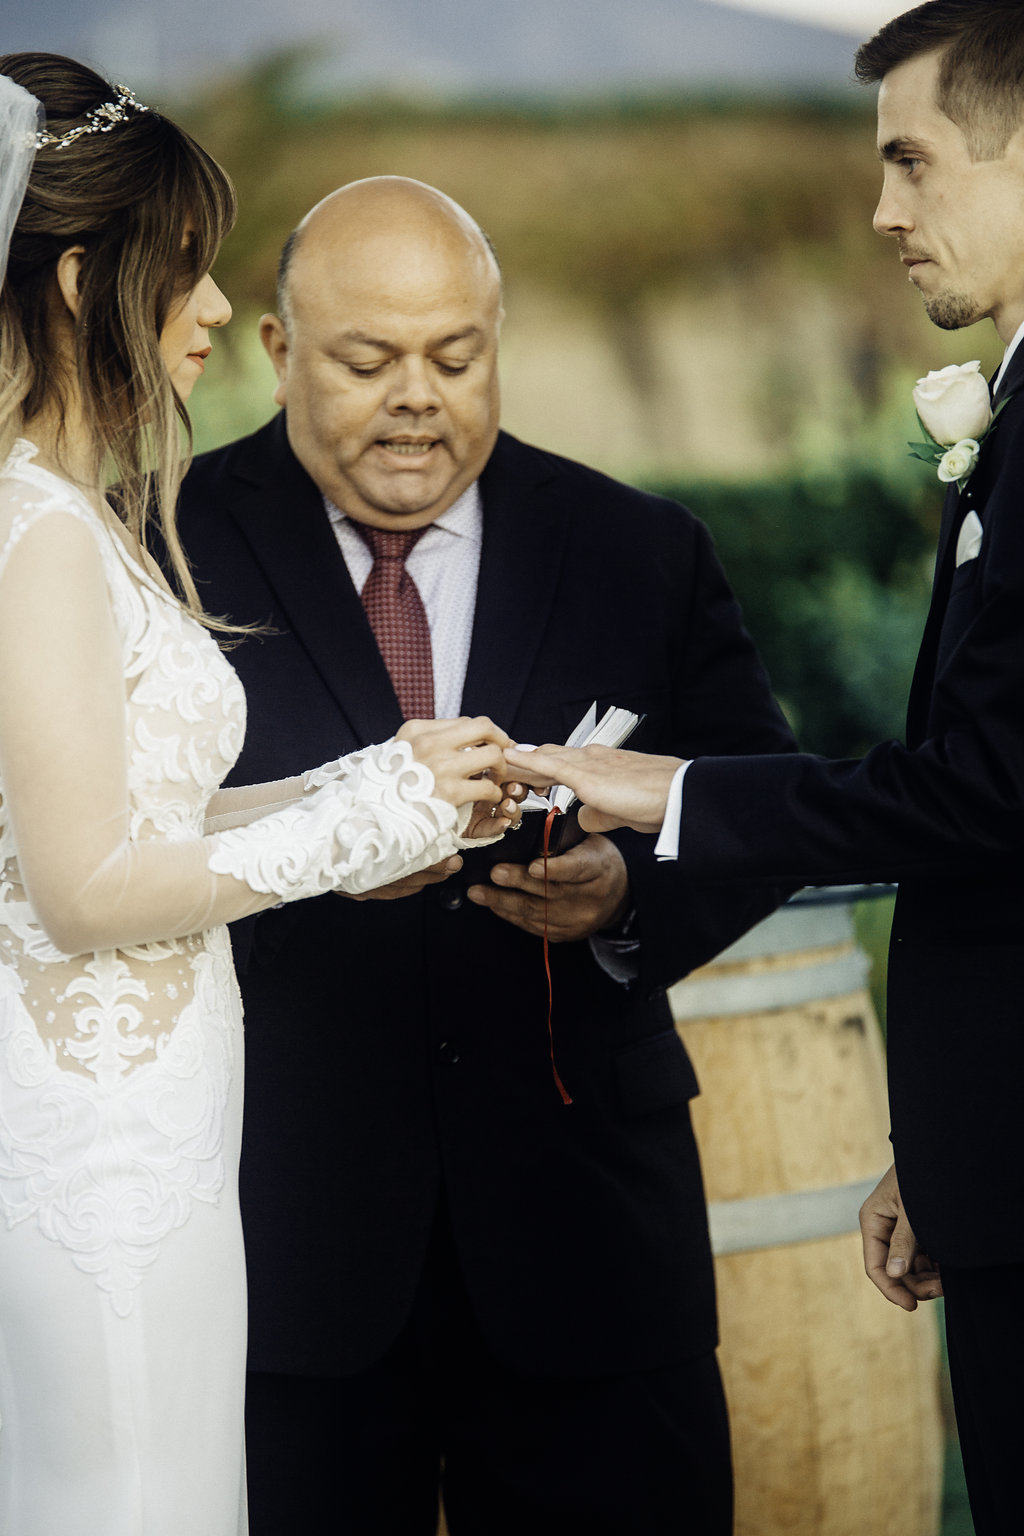 Wedding Photograph Of Bride Looking at Her Groom While Giving The Ring Los Angeles